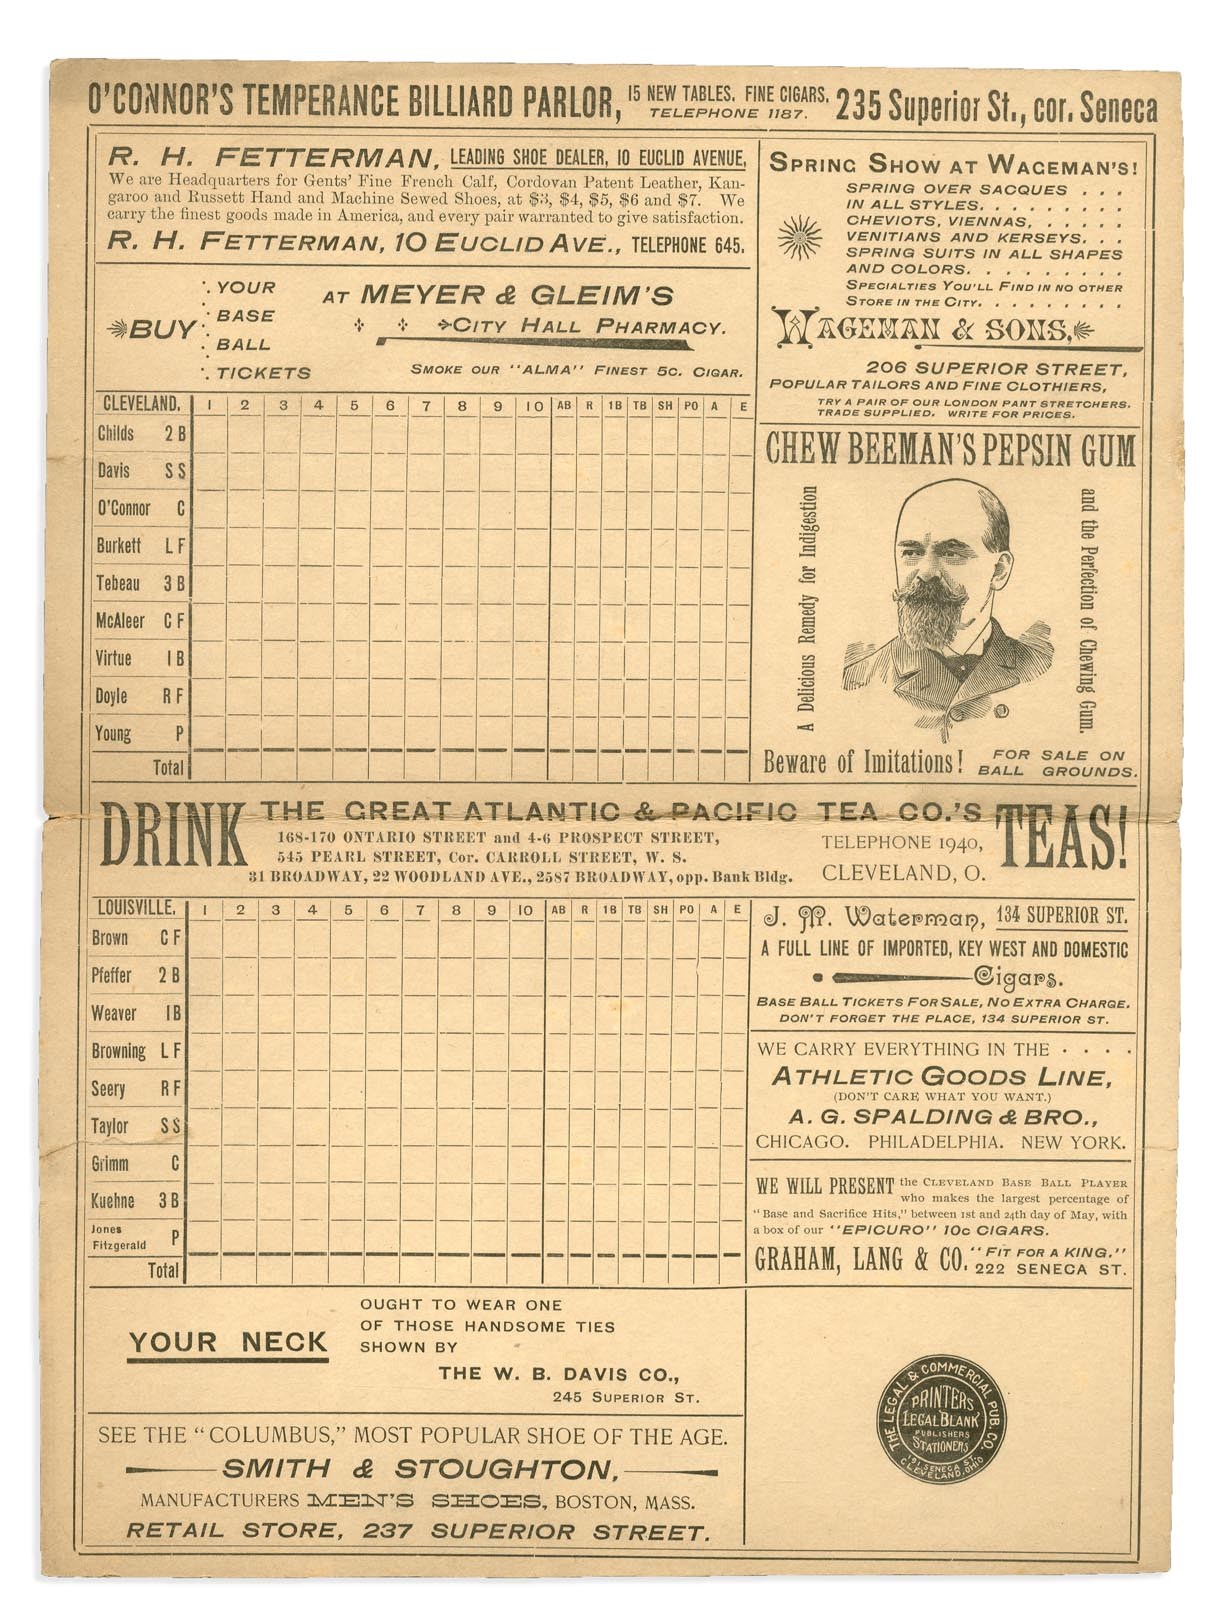 Cleveland Indians - 1892 Cleveland Spiders Scorecard w/ Cy Young Pitching